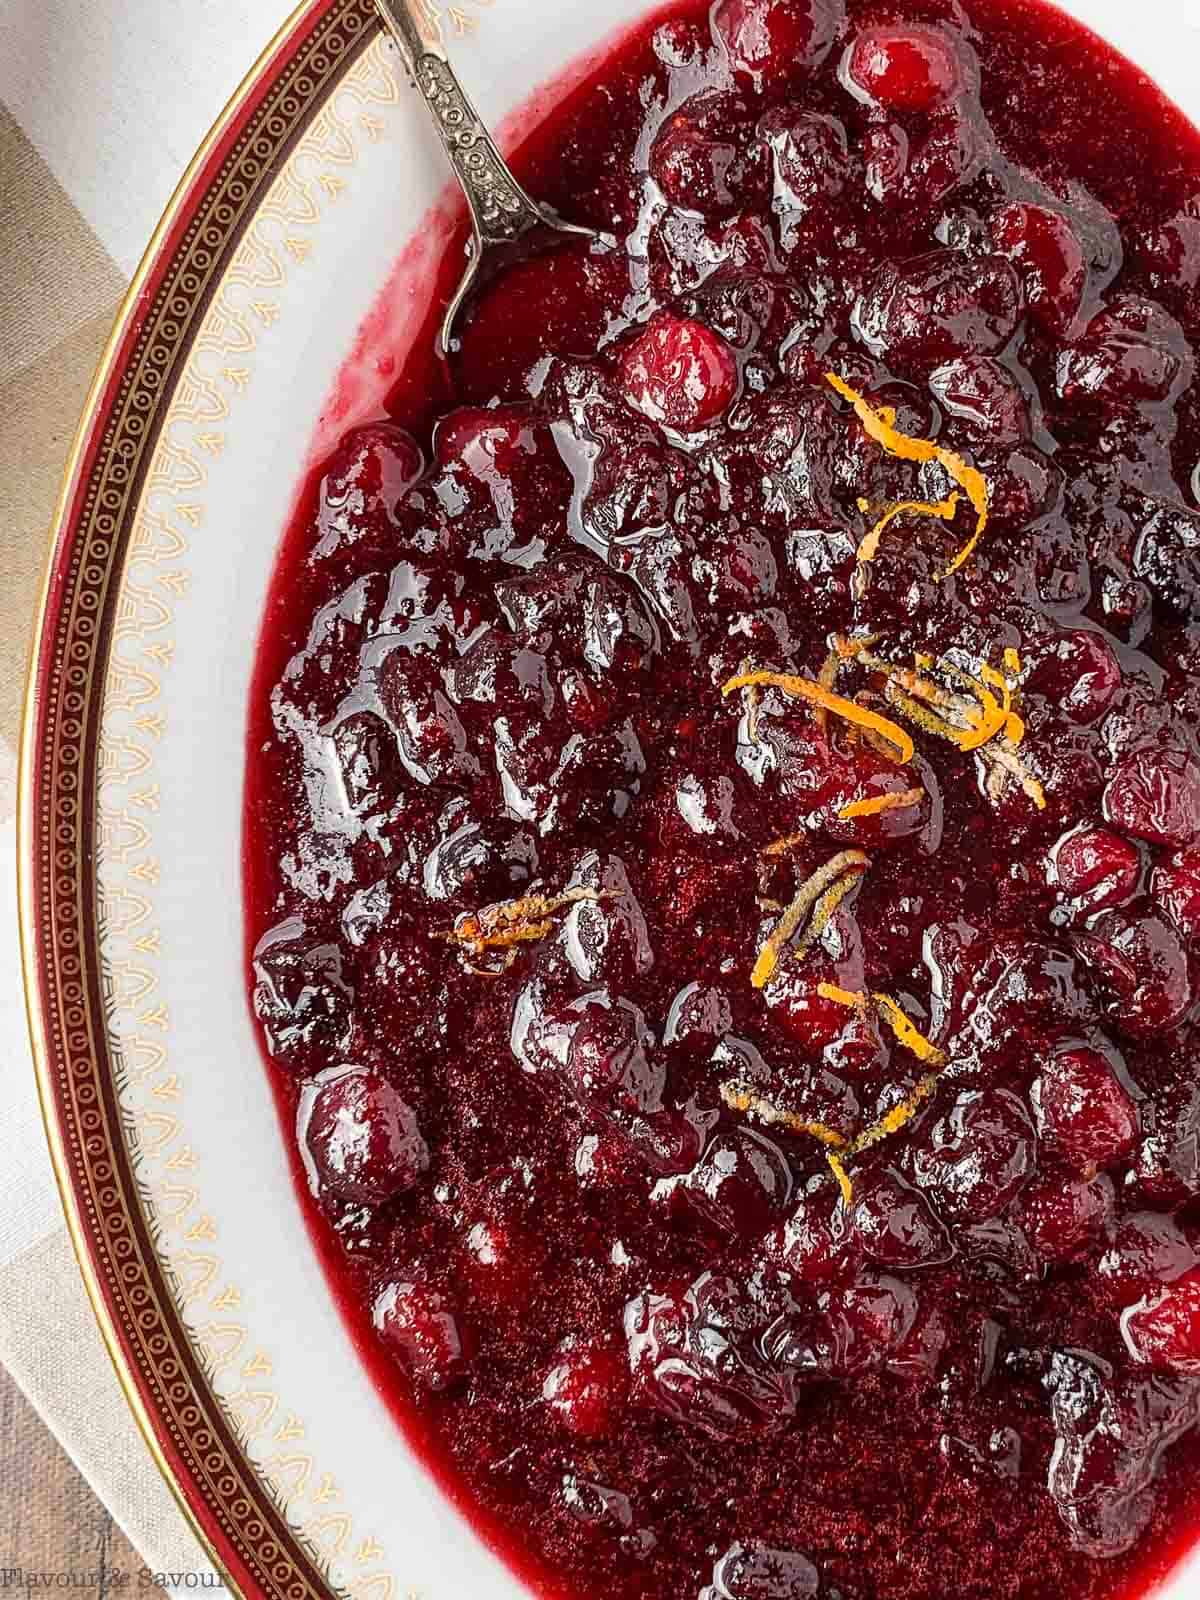 Close up view of cranberry orange sauce with Triple sec.